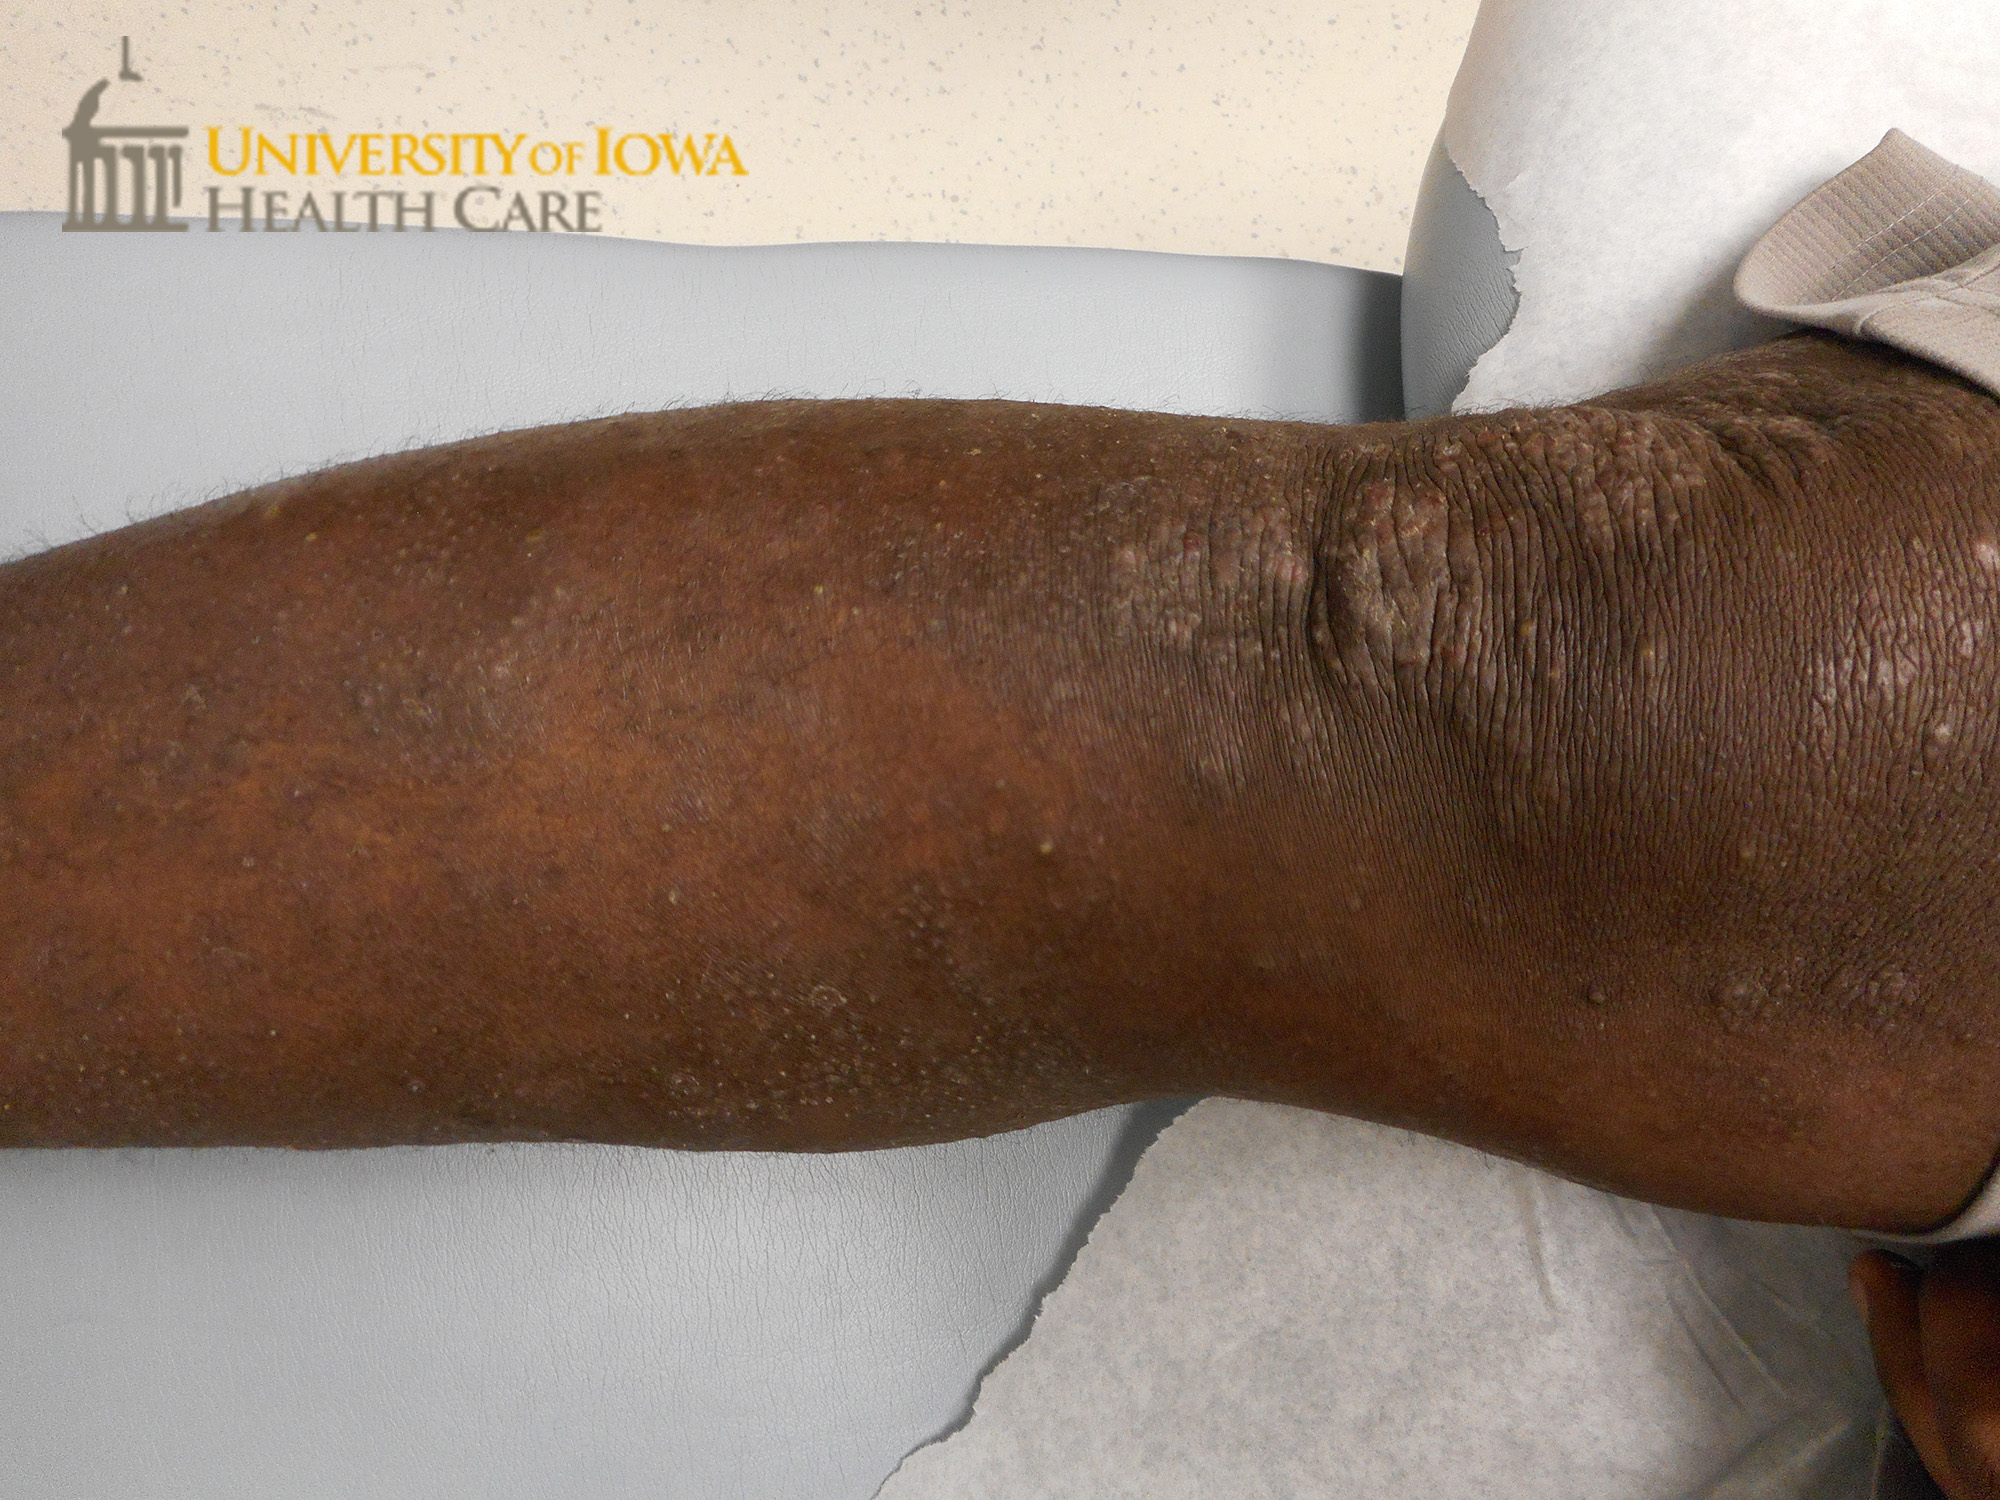 Pink waxy papules coalescing into plaques on the leg. (click images for higher resolution).